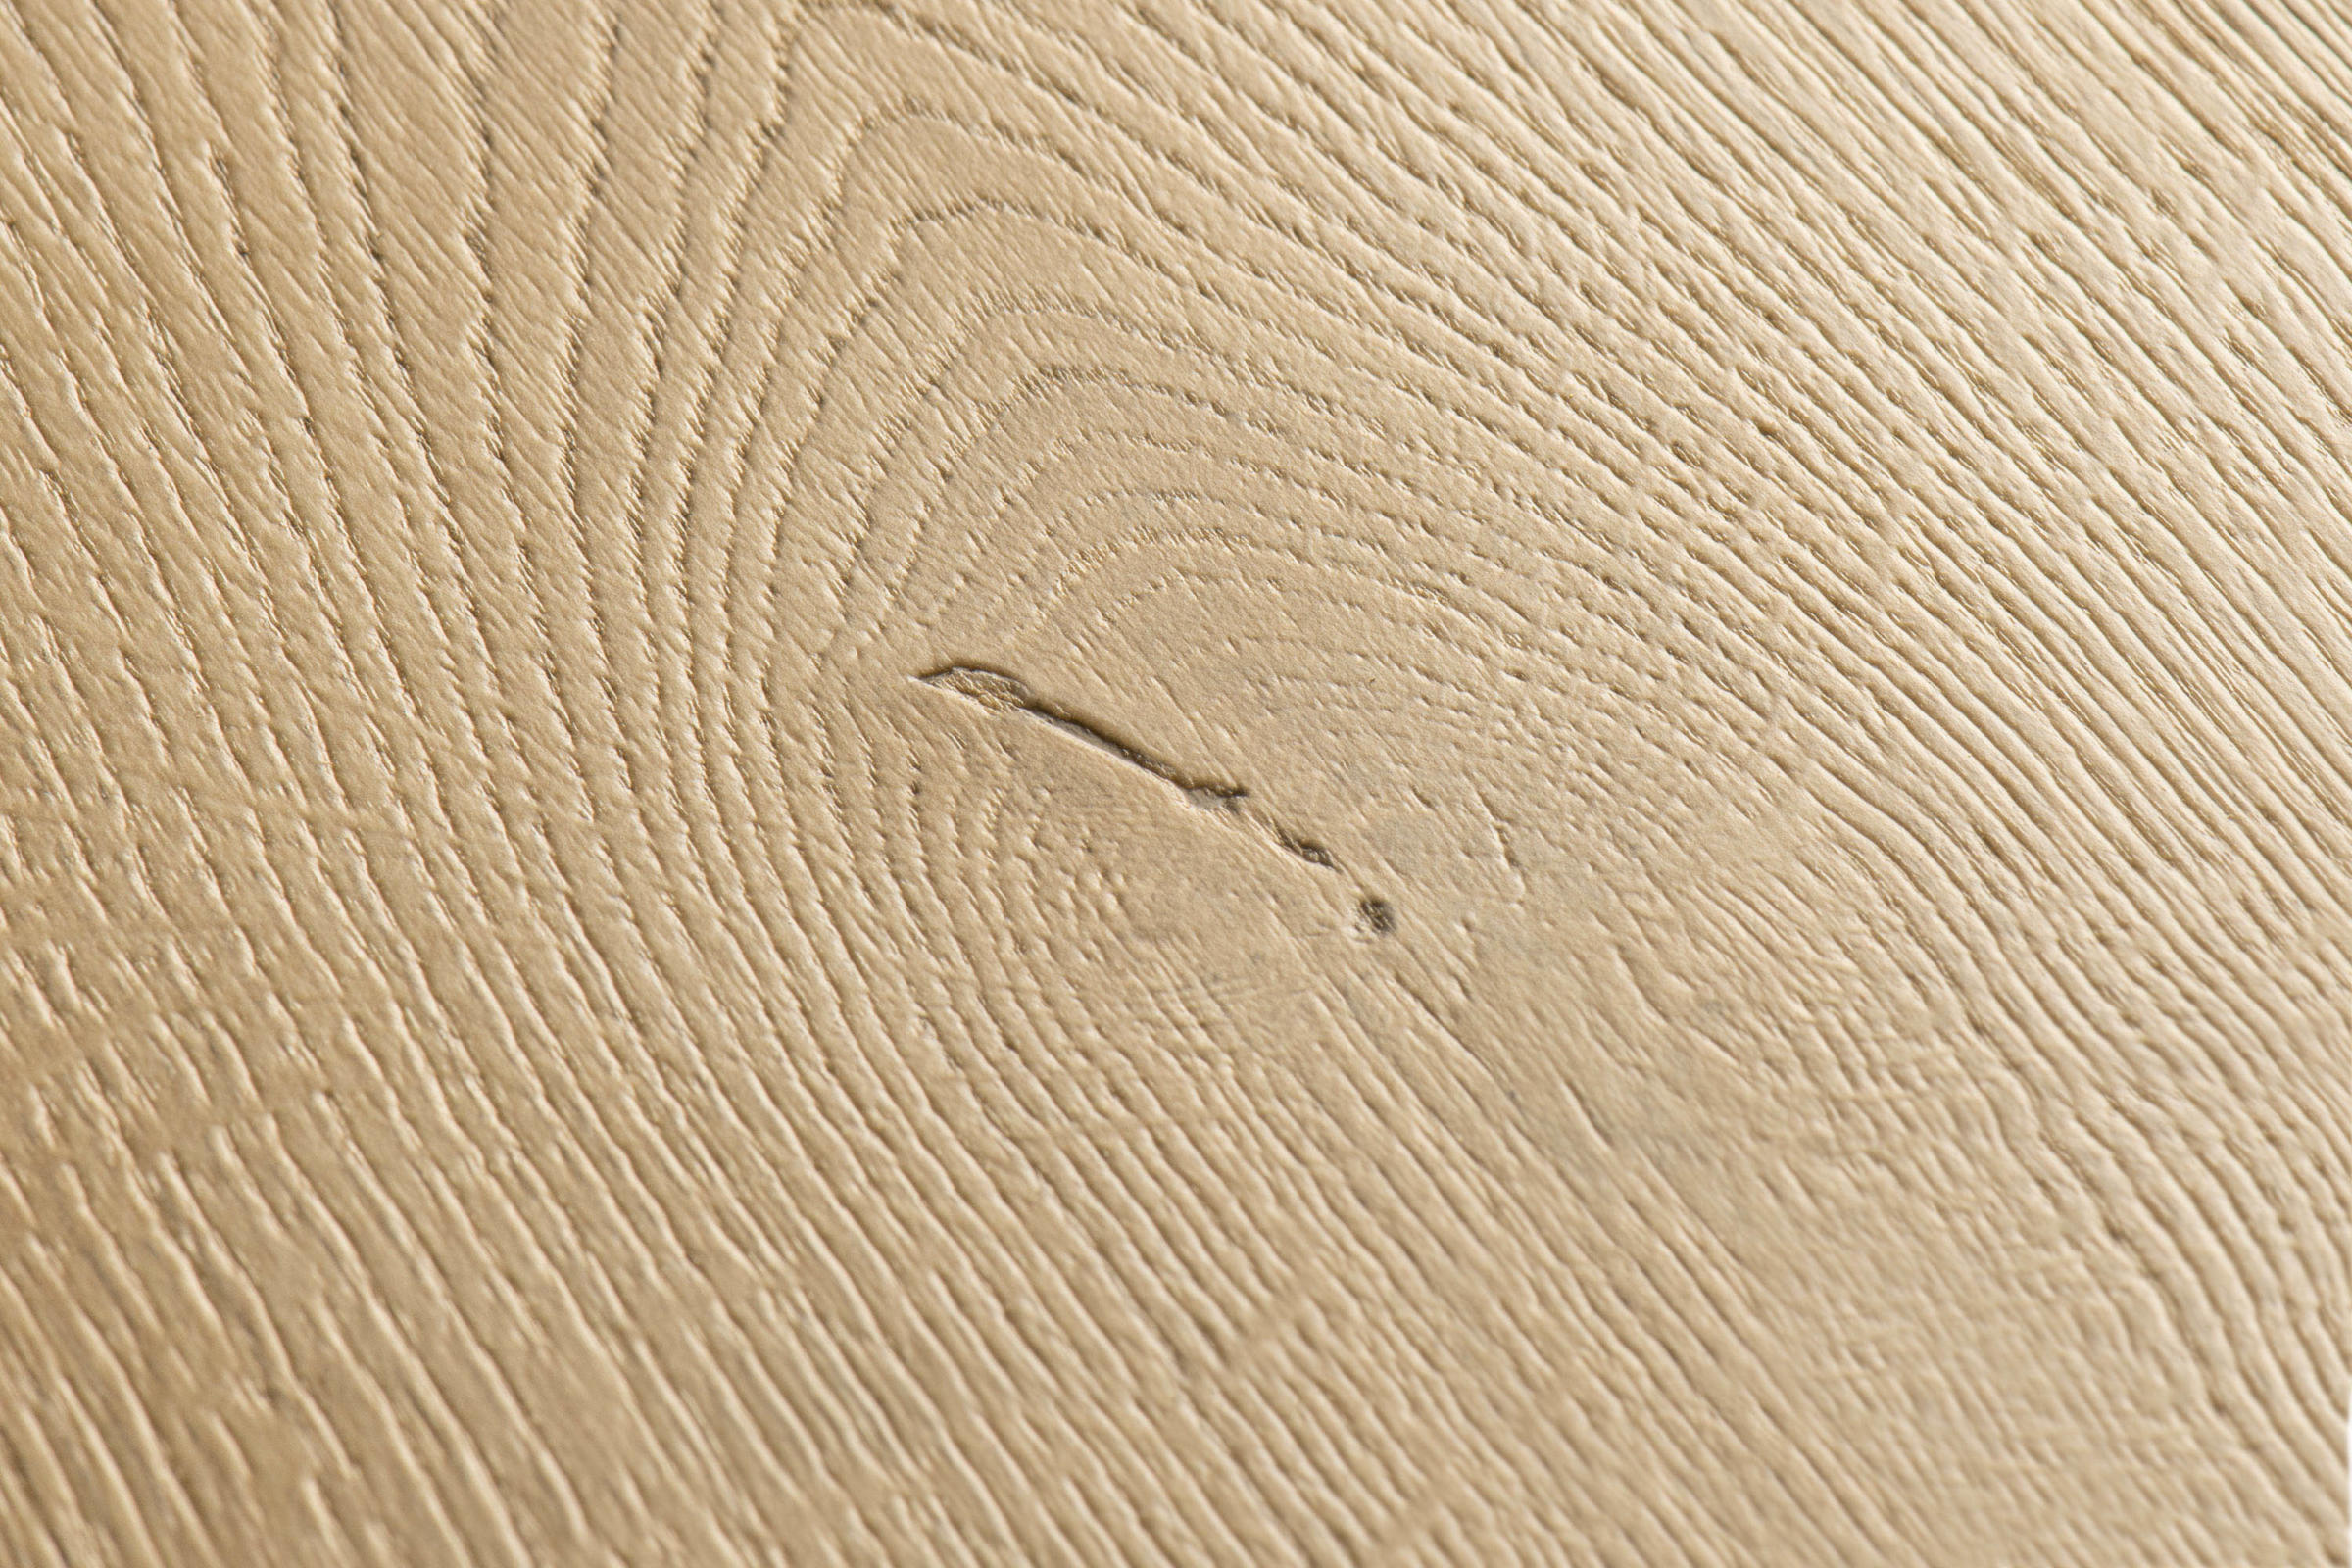 Perspective Nature Laminate Floorboards Embossing Close Up.